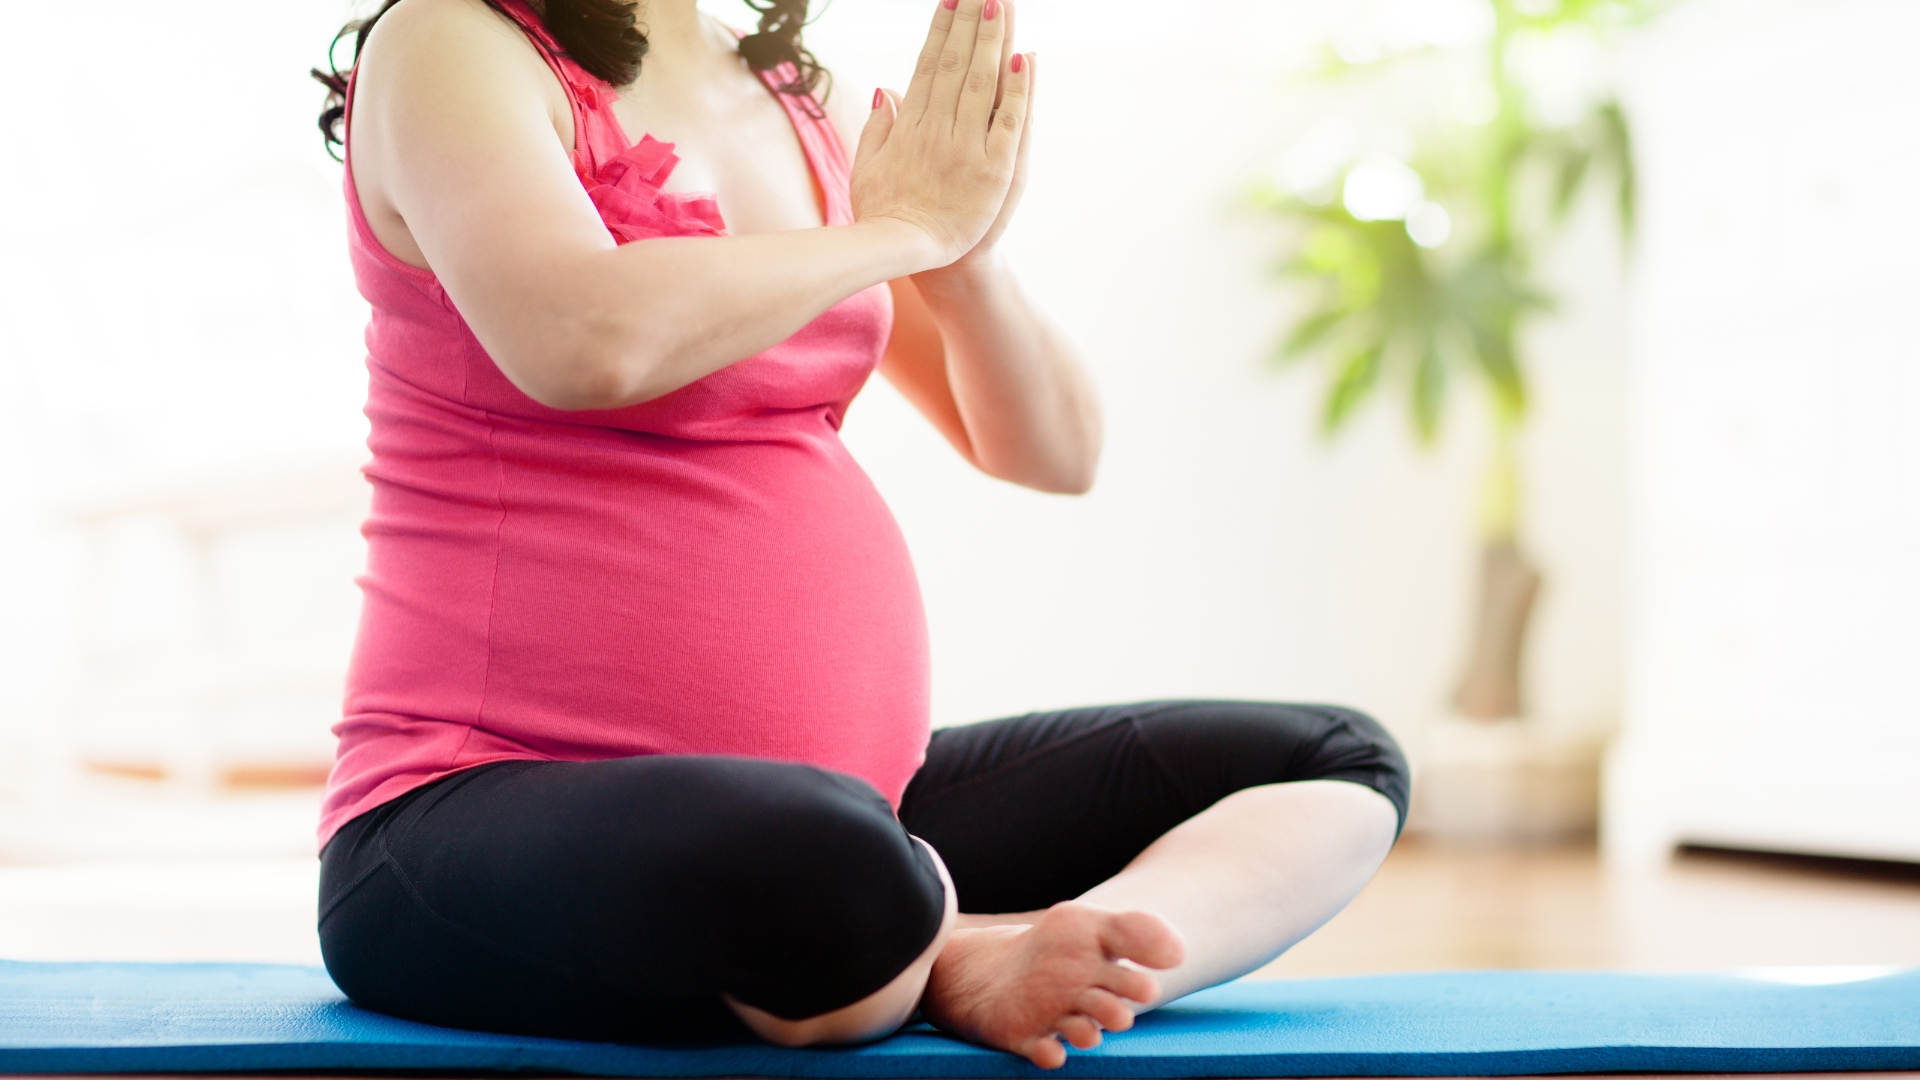 Does Pregnancy Yoga Help With Gestational Diabetes?